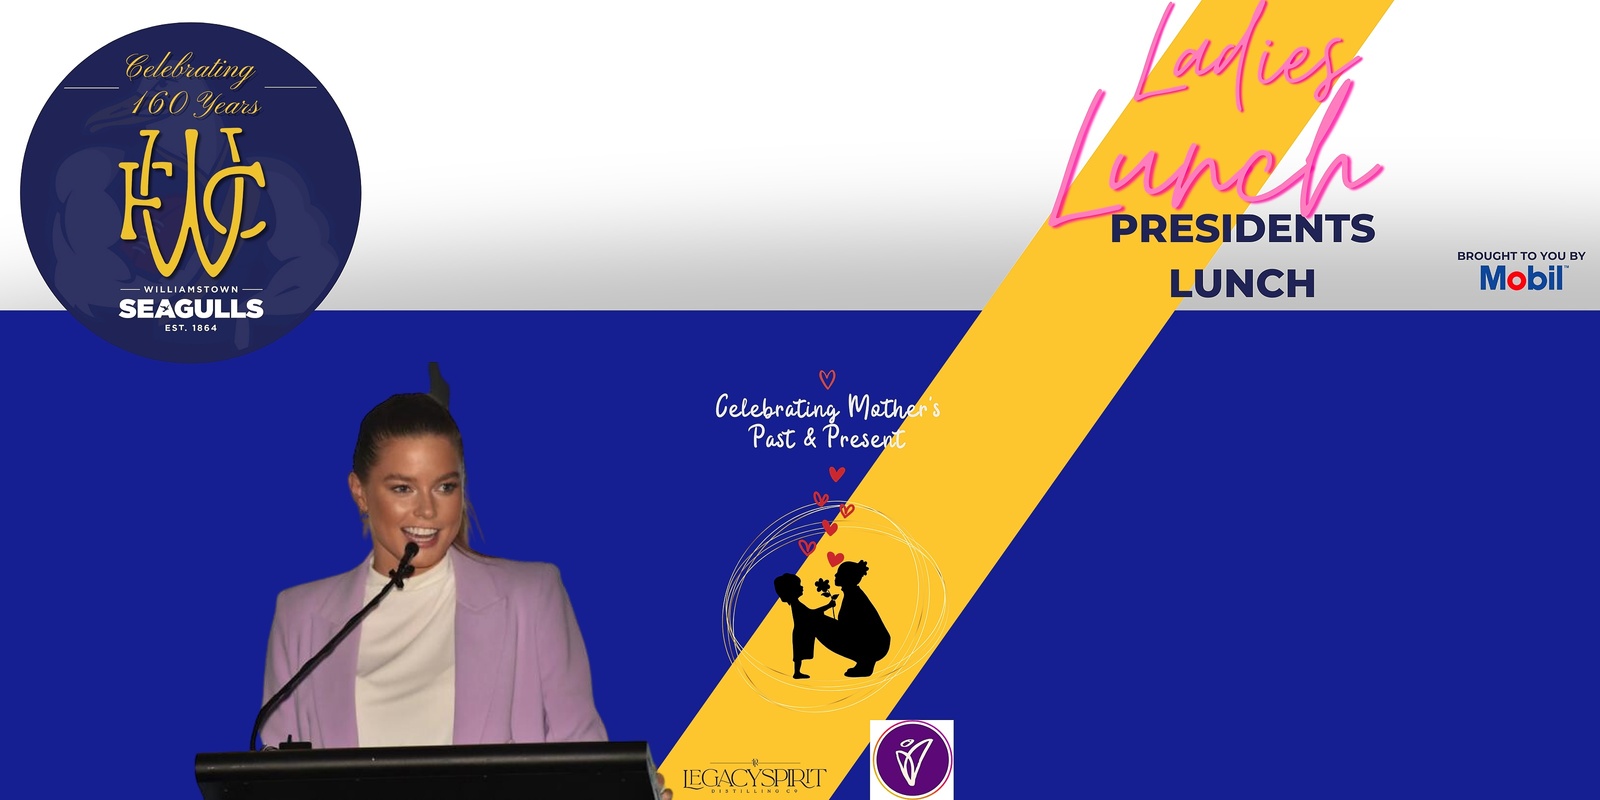 Banner image for Presidents Lunch - Vs Essendon (Ladies Day)